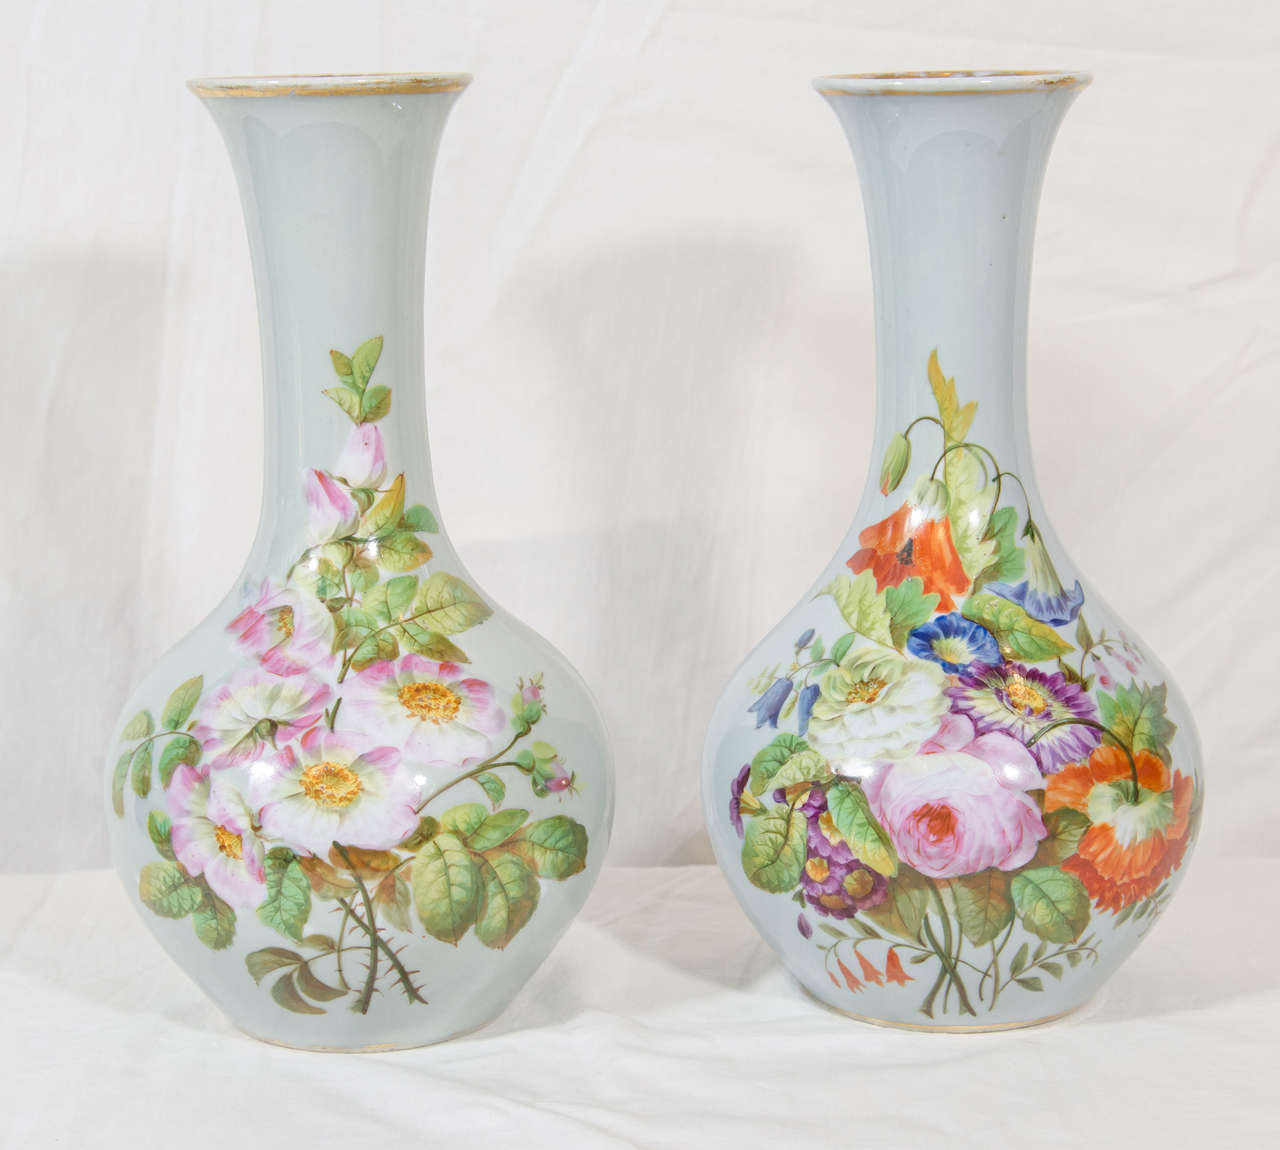 This lovely pair of 19th-century opaline vases have well-painted flowers. Individually hand-painted, each with a bouquet of peonies, tulips, and other flowers on a light blue ground. 
The glass is slightly translucent, as opaline should